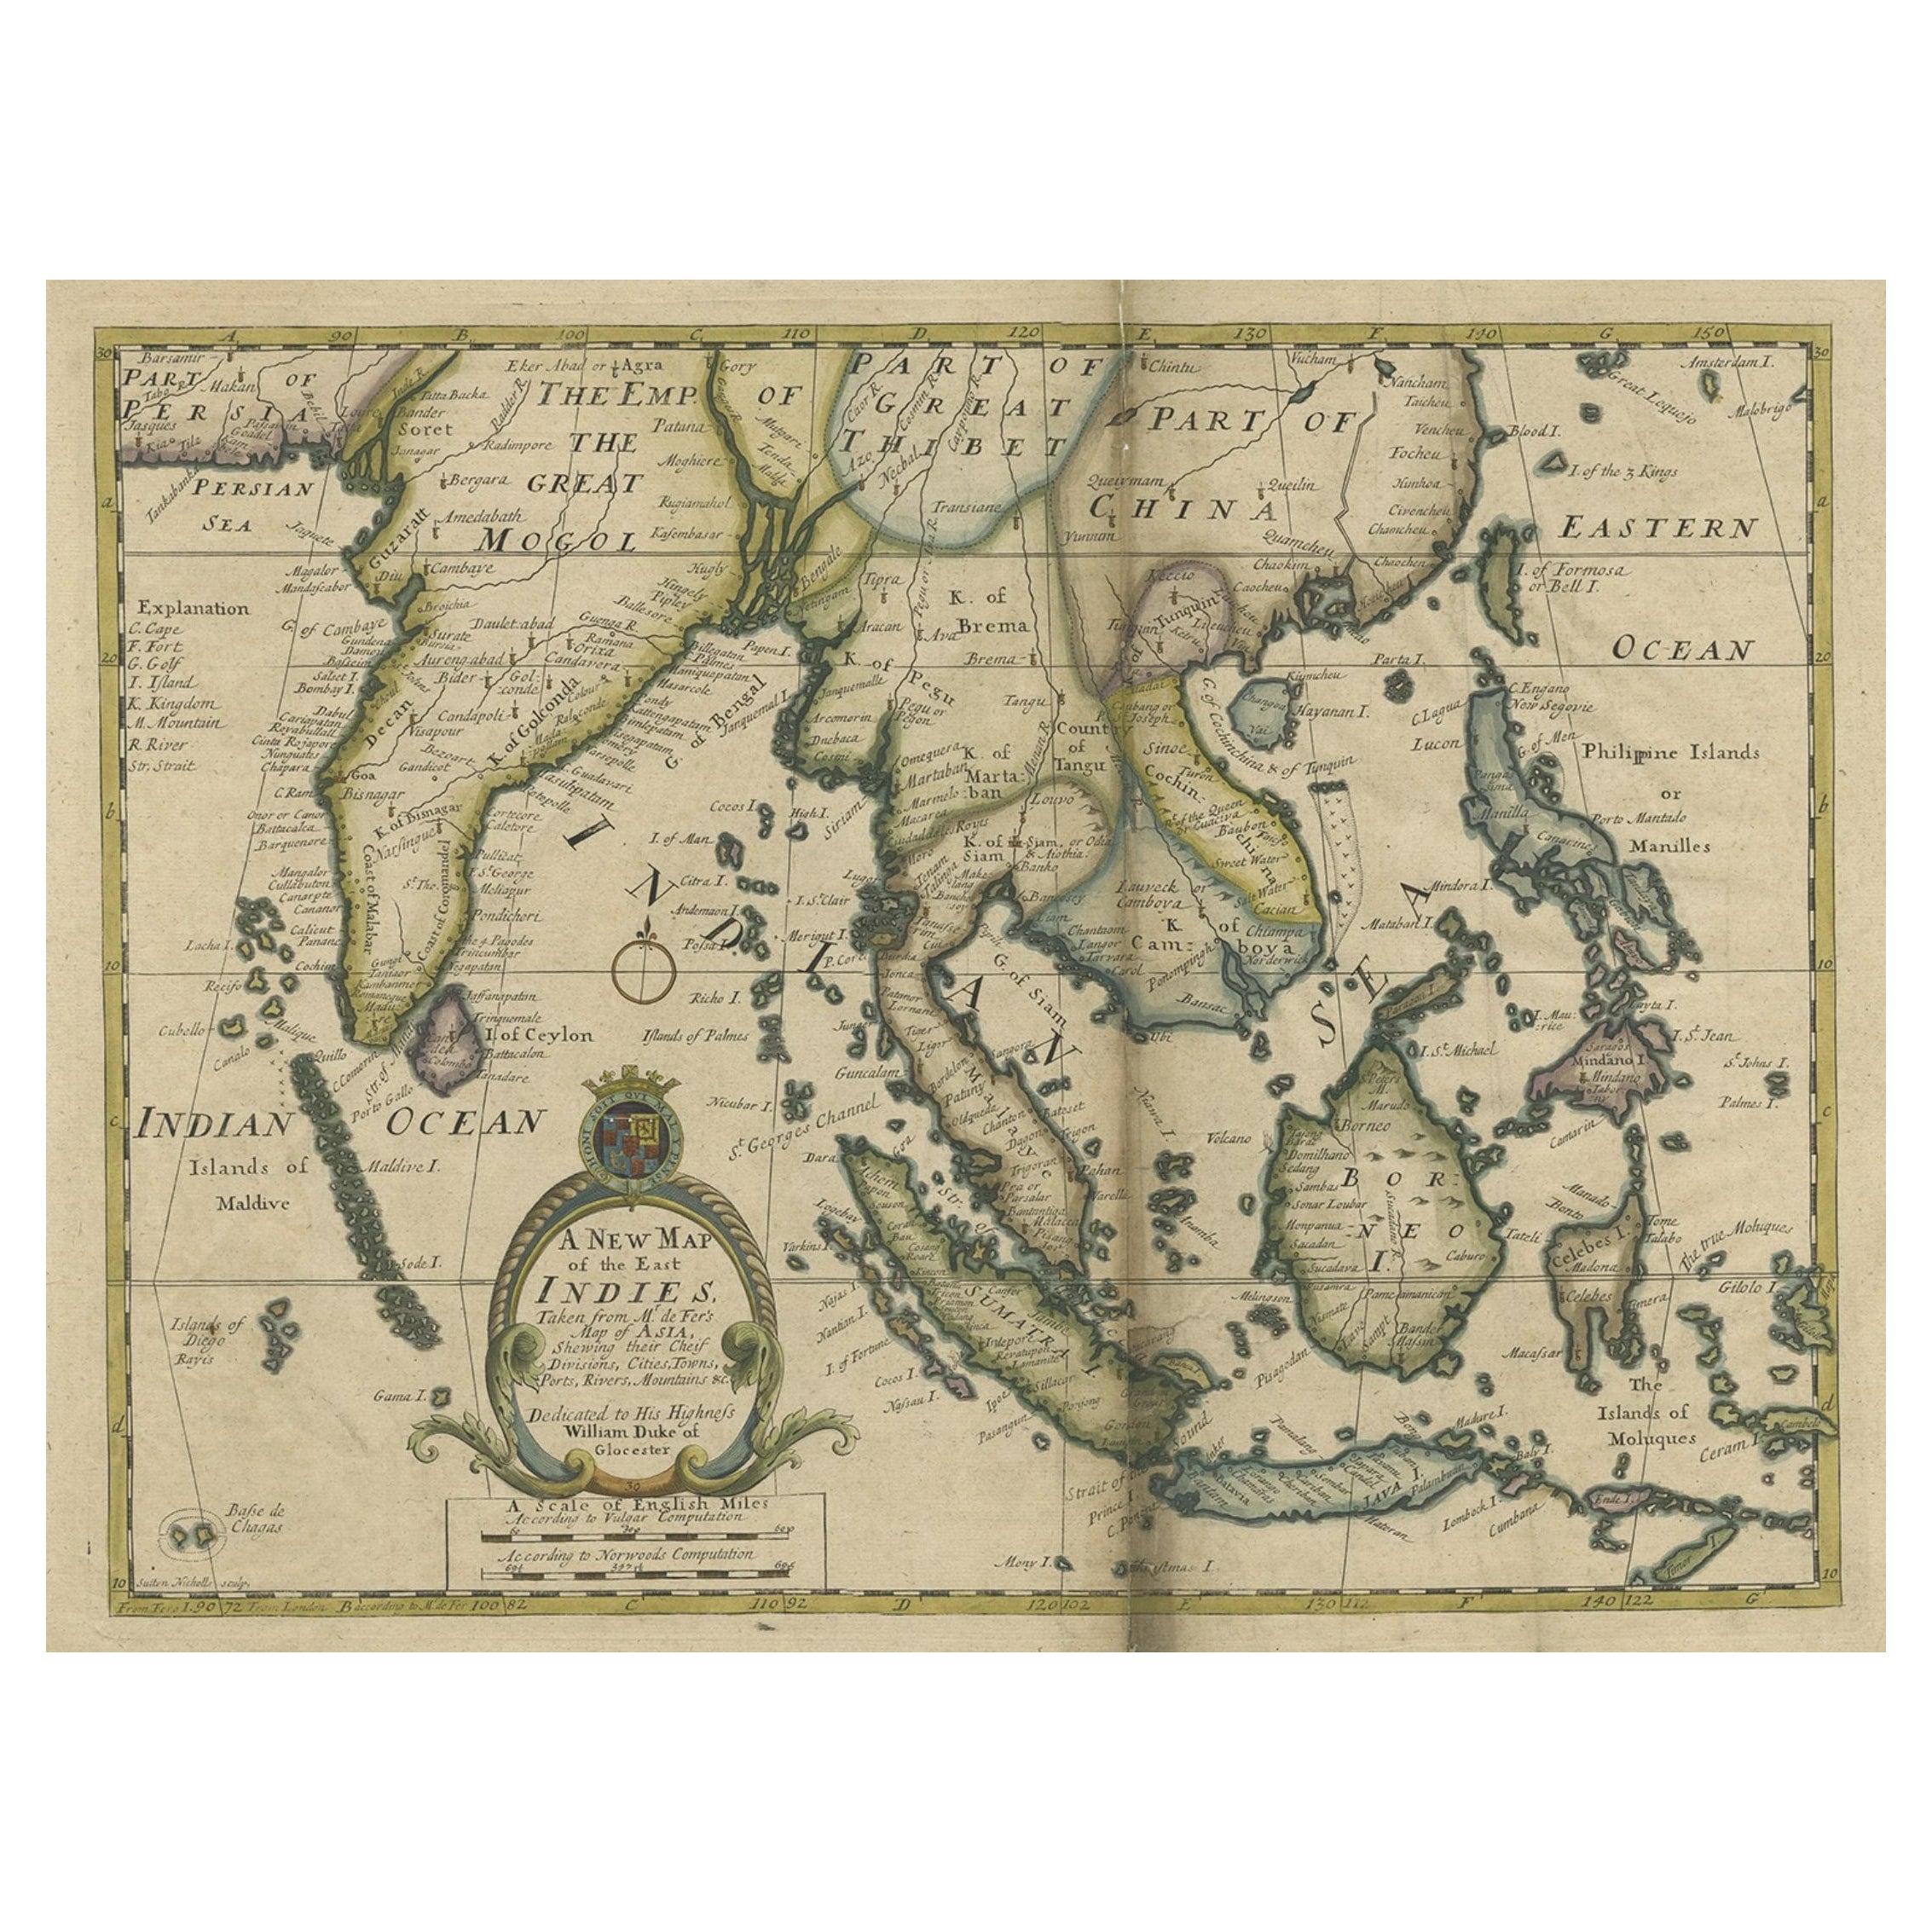 Antique Map of Southeast Asia from Persia to the Timor Island, 1712